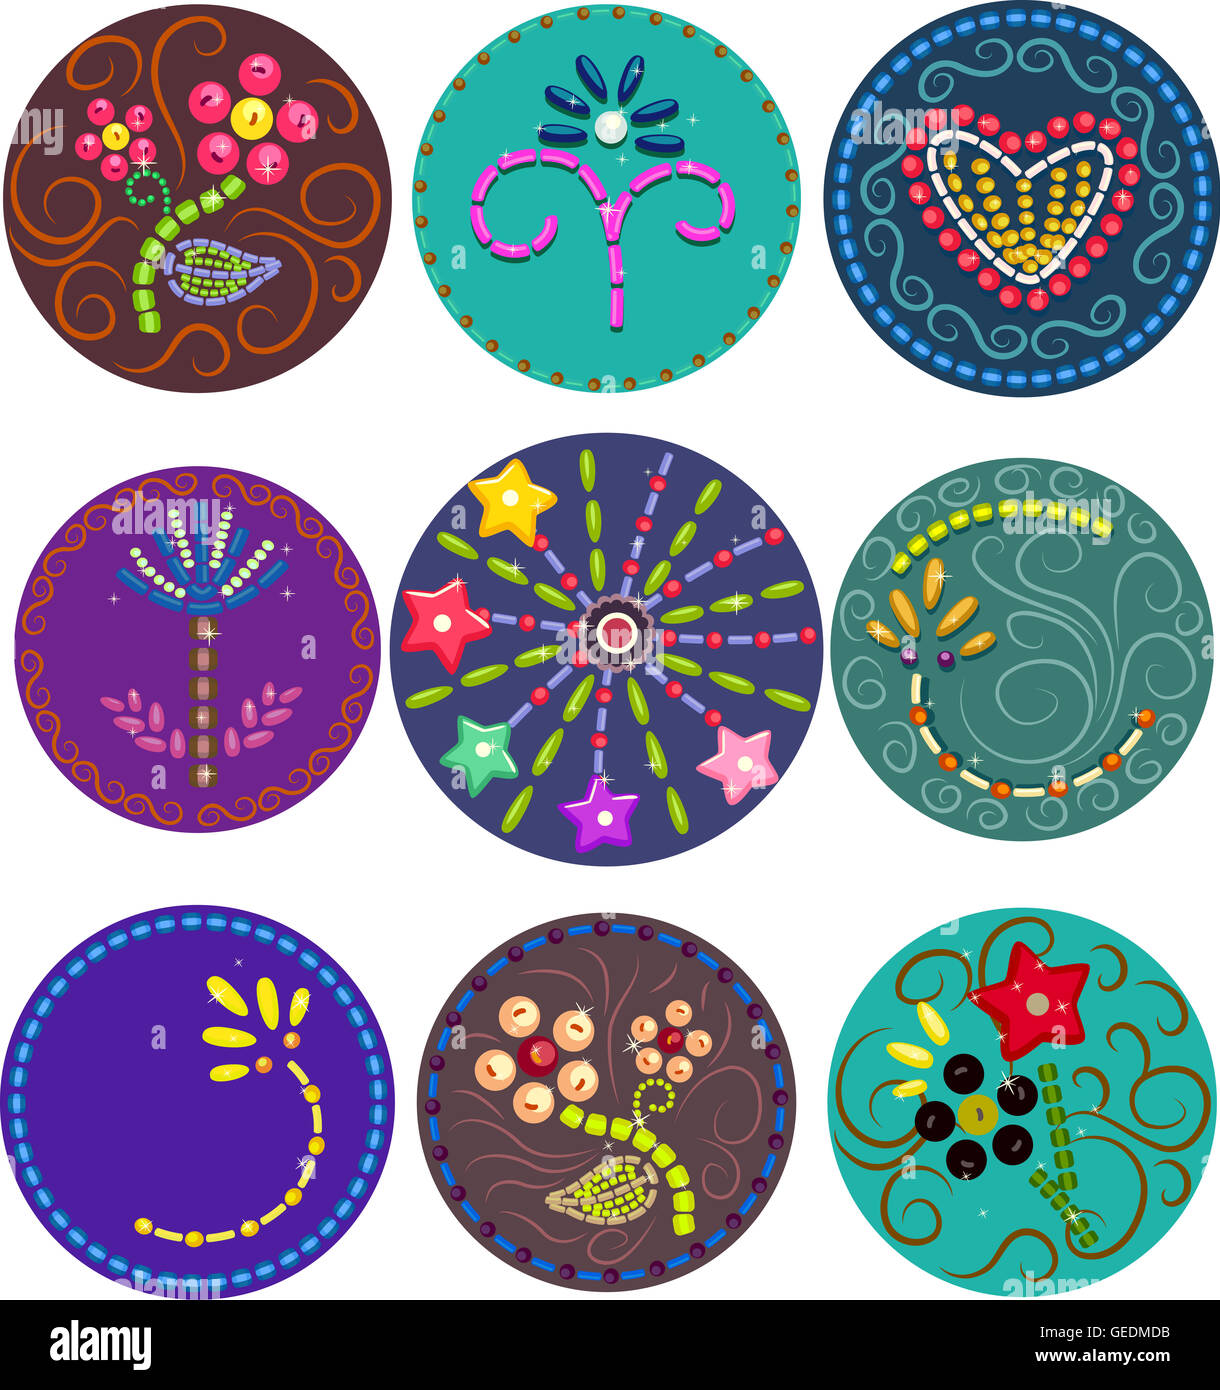 Illustration Featuring Colorful Buttons Adorned with Beads Stock Photo